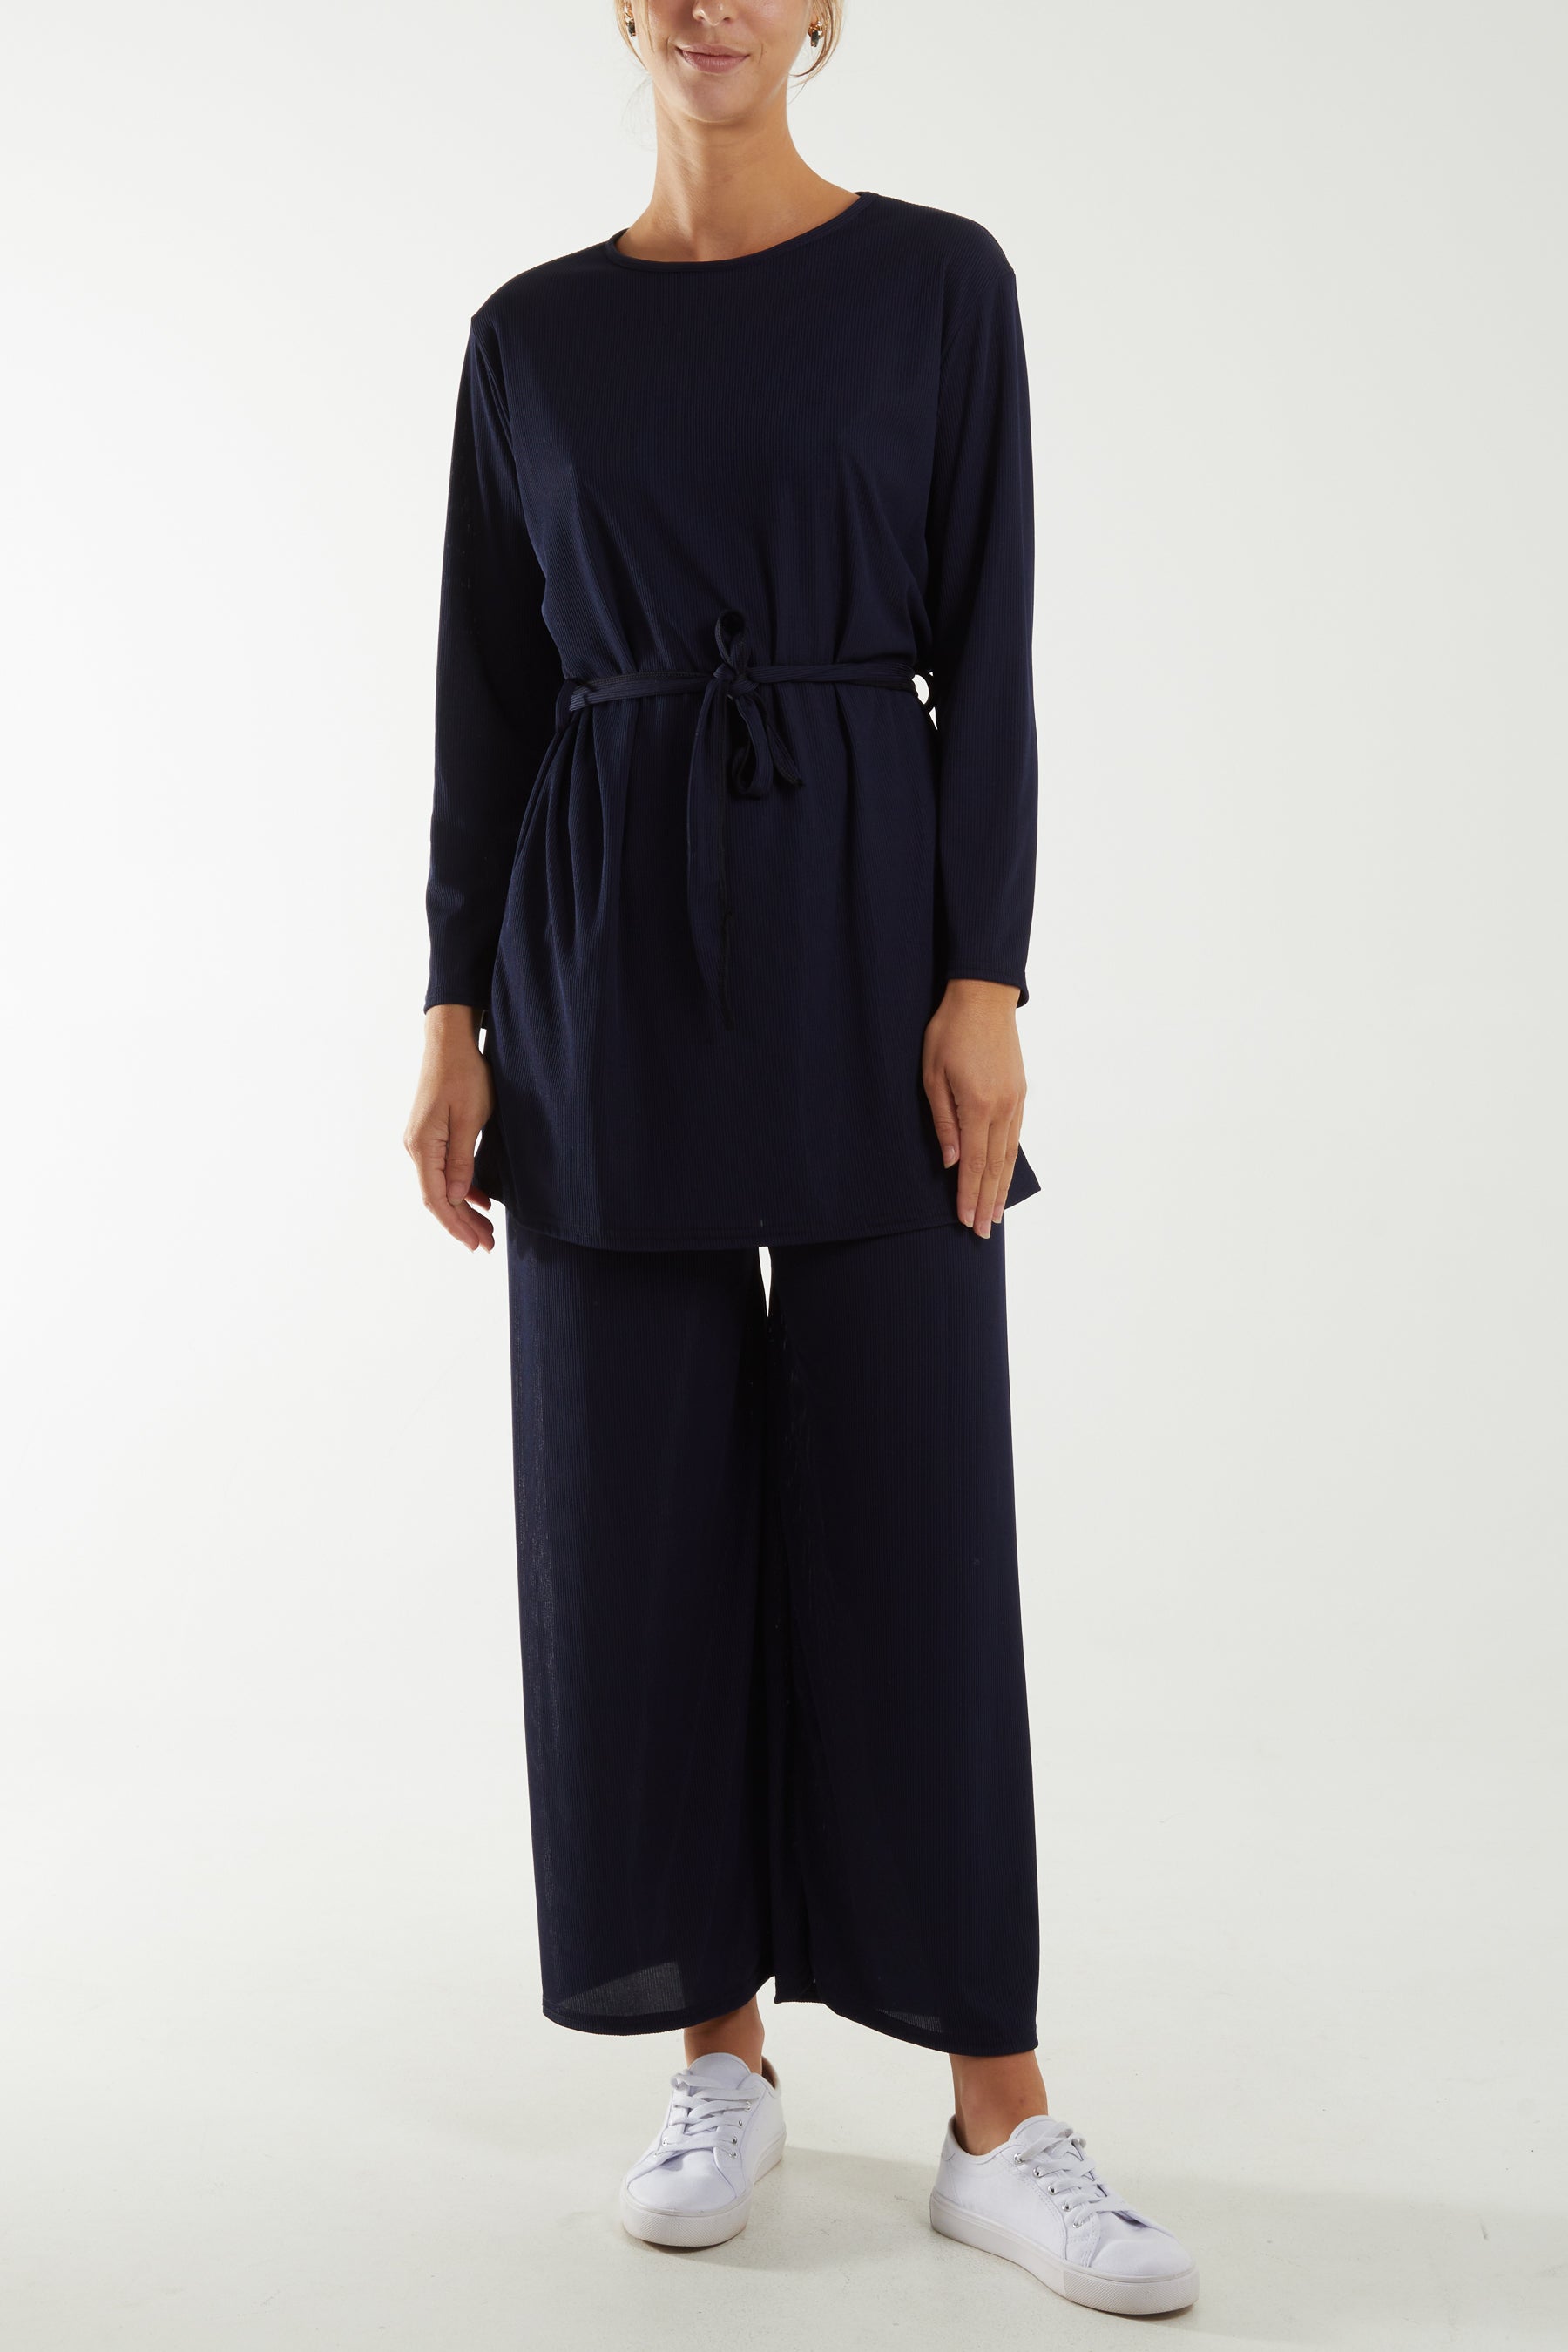 Tied Front Top & Trousers Belted Set